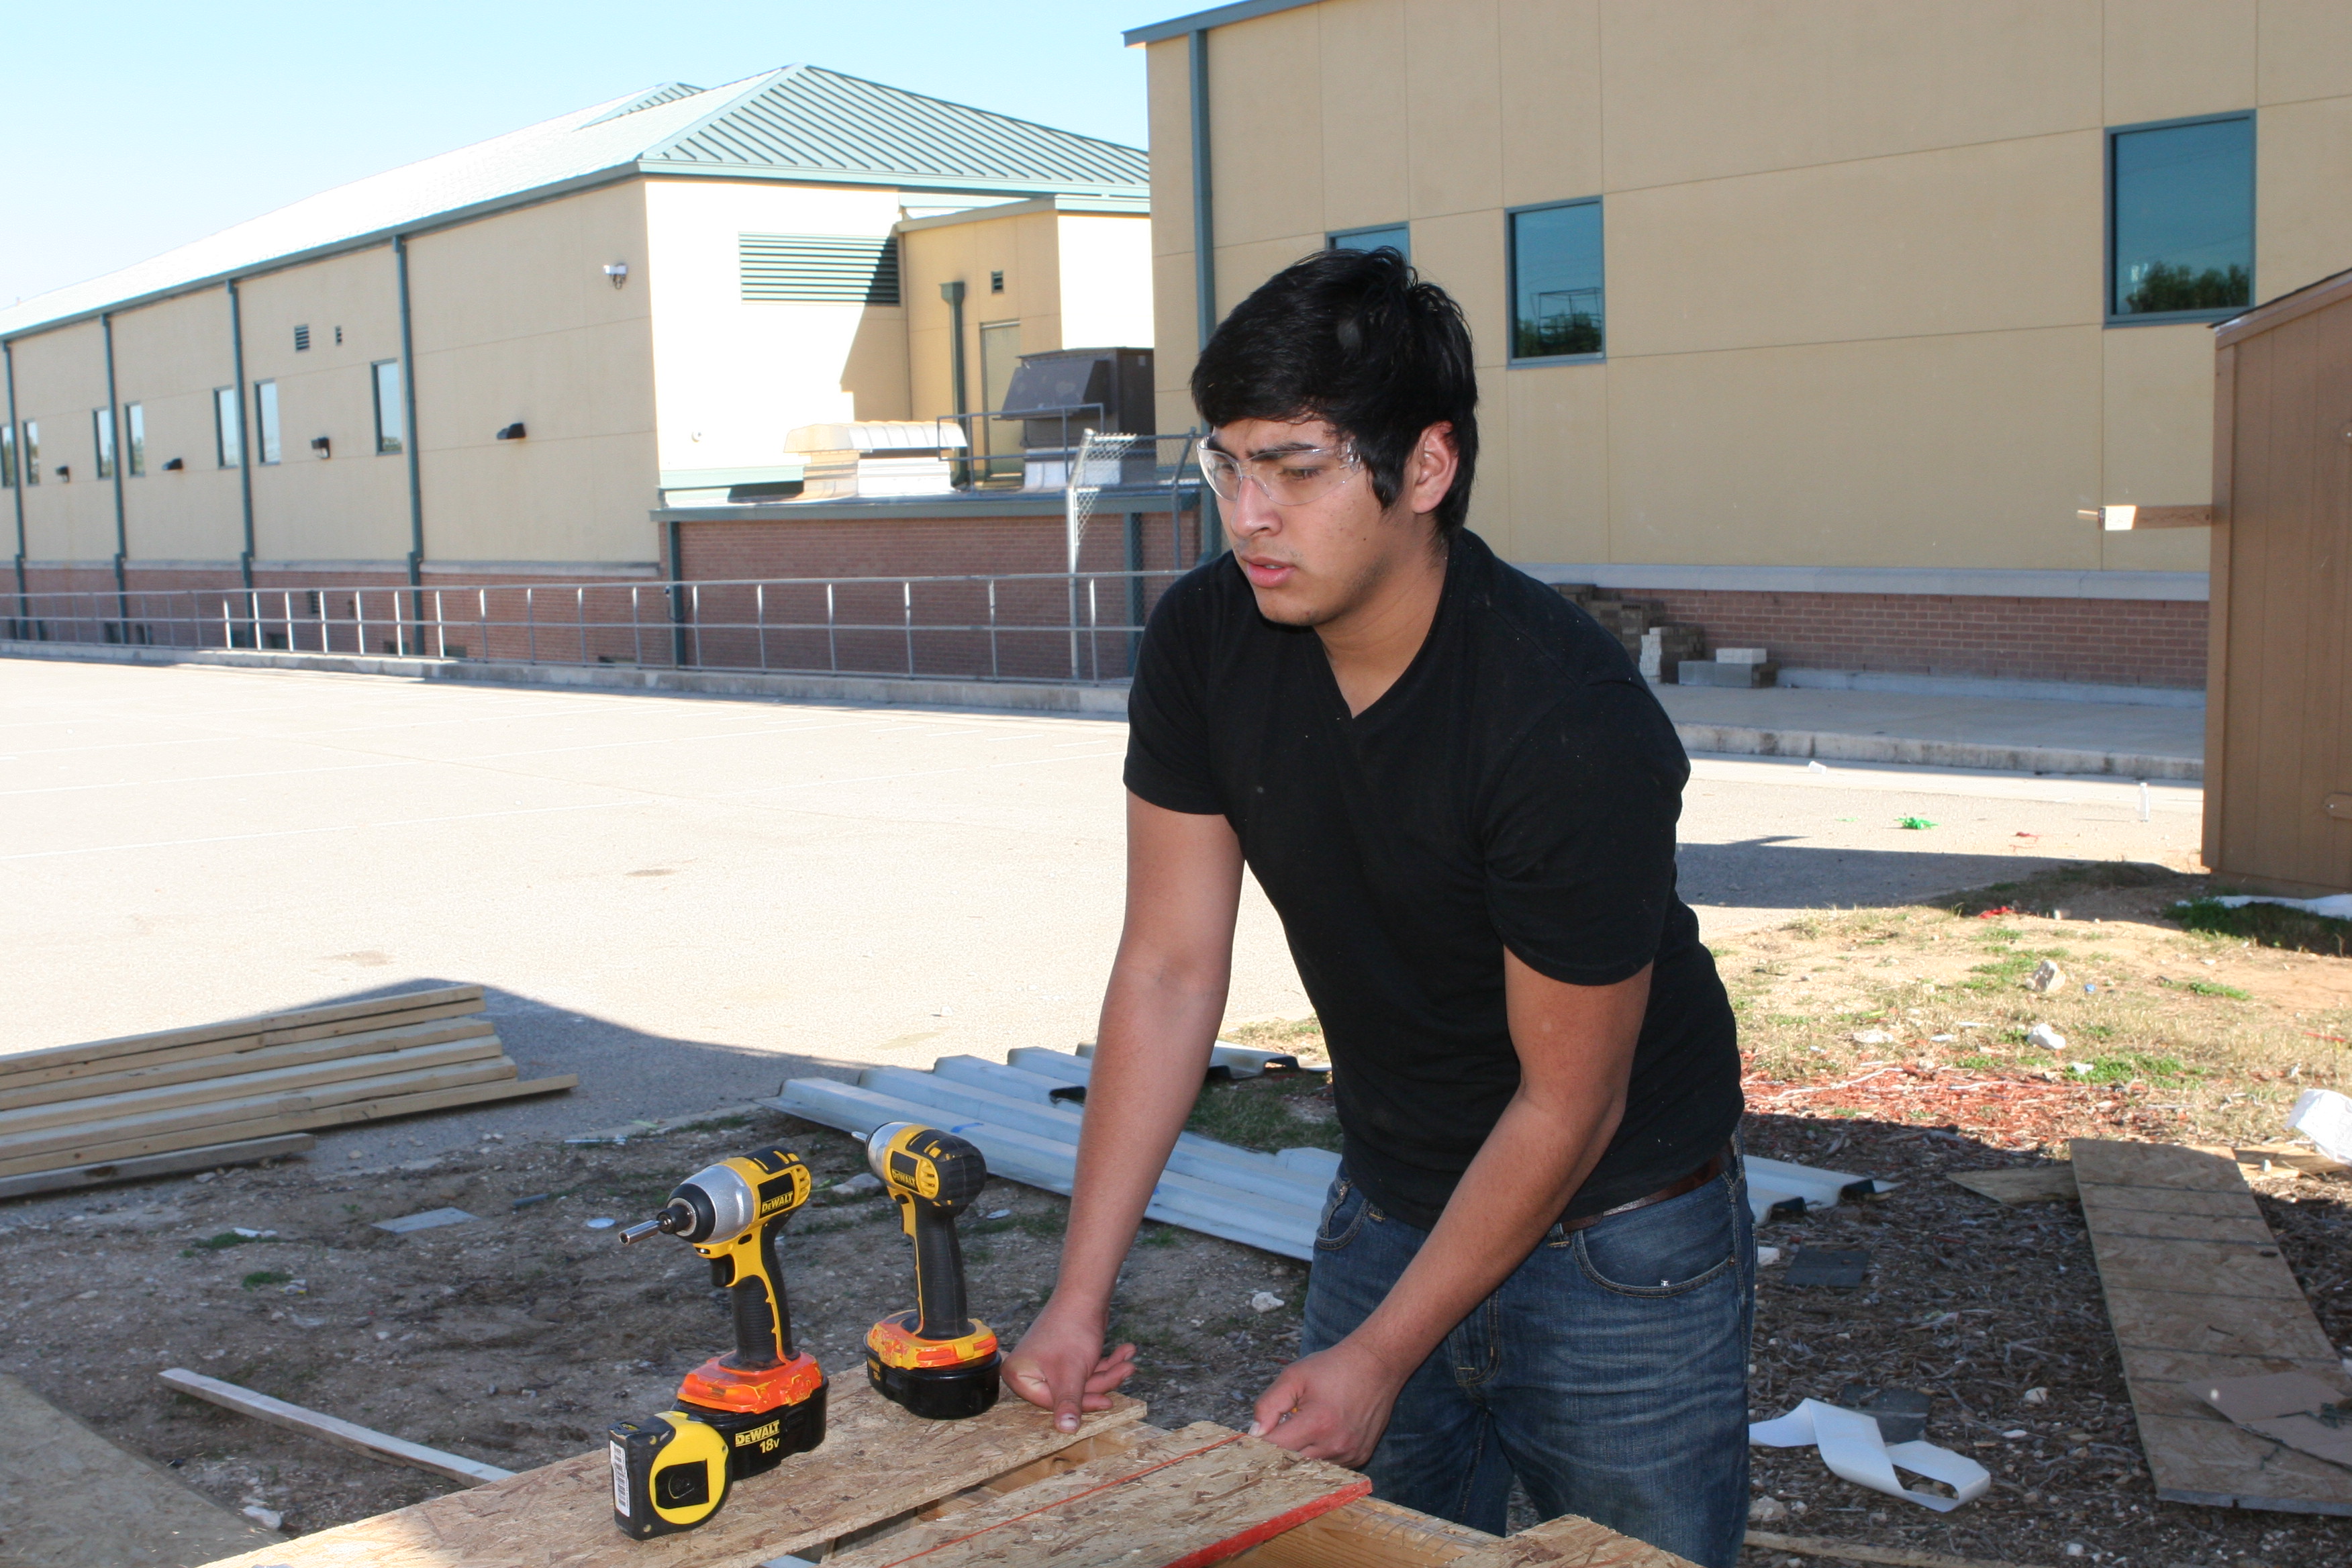 (Image) Robert Muniz builds a window frame for a micro-home at the Construction Careers Academy.